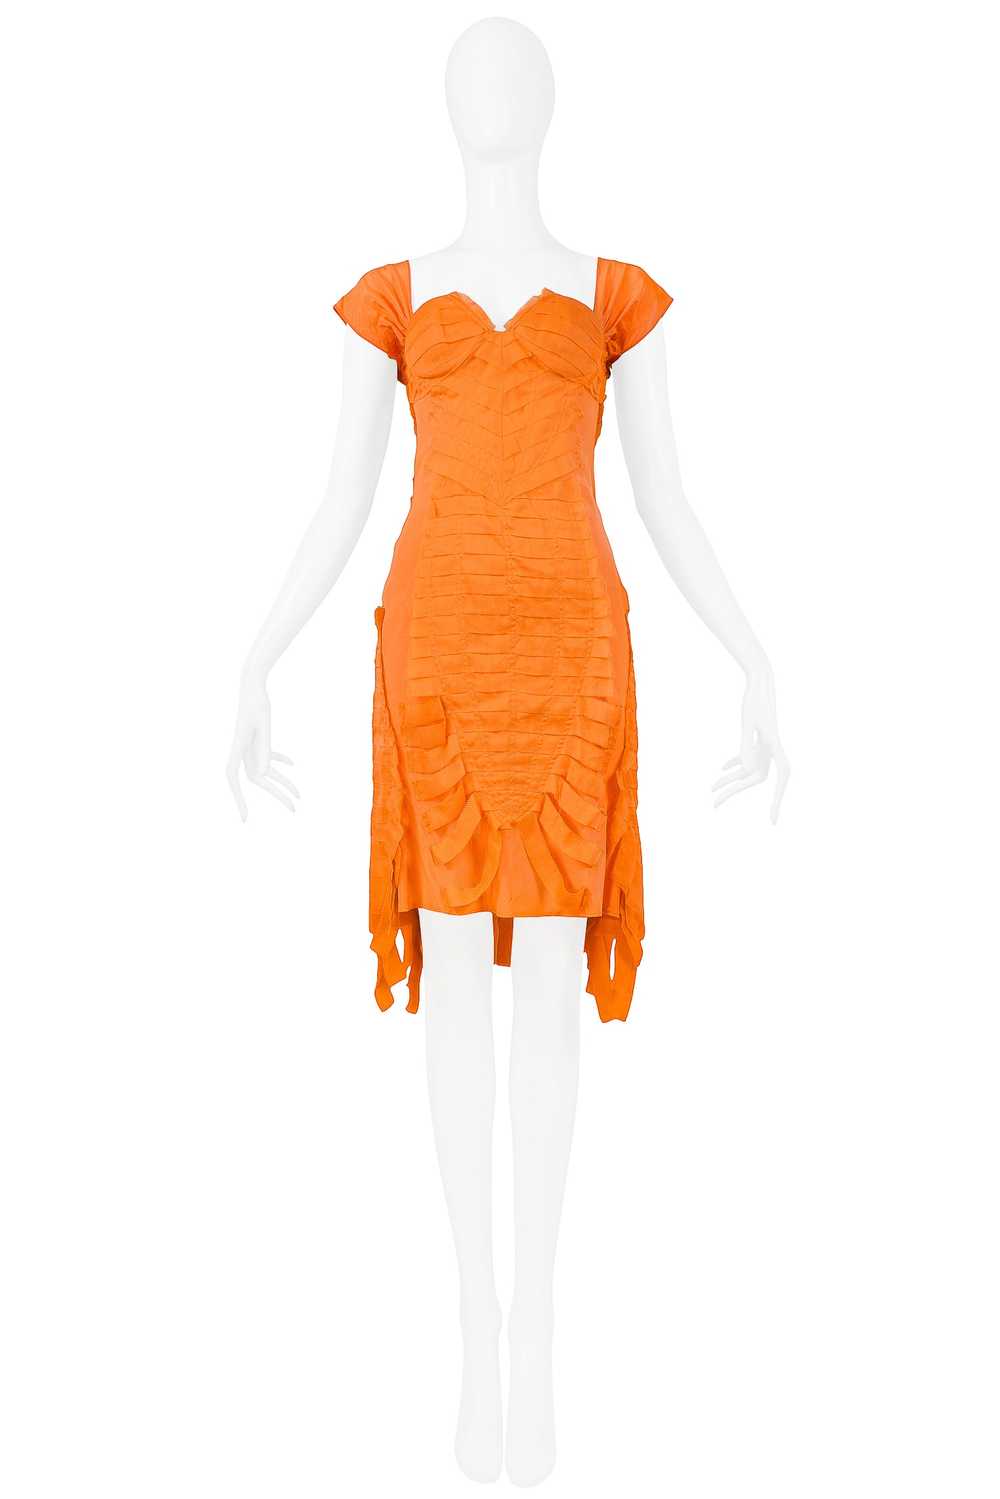 GUCCI BY TOM FORD ORANGE SILK COCKTAIL DRESS 2004 - image 1